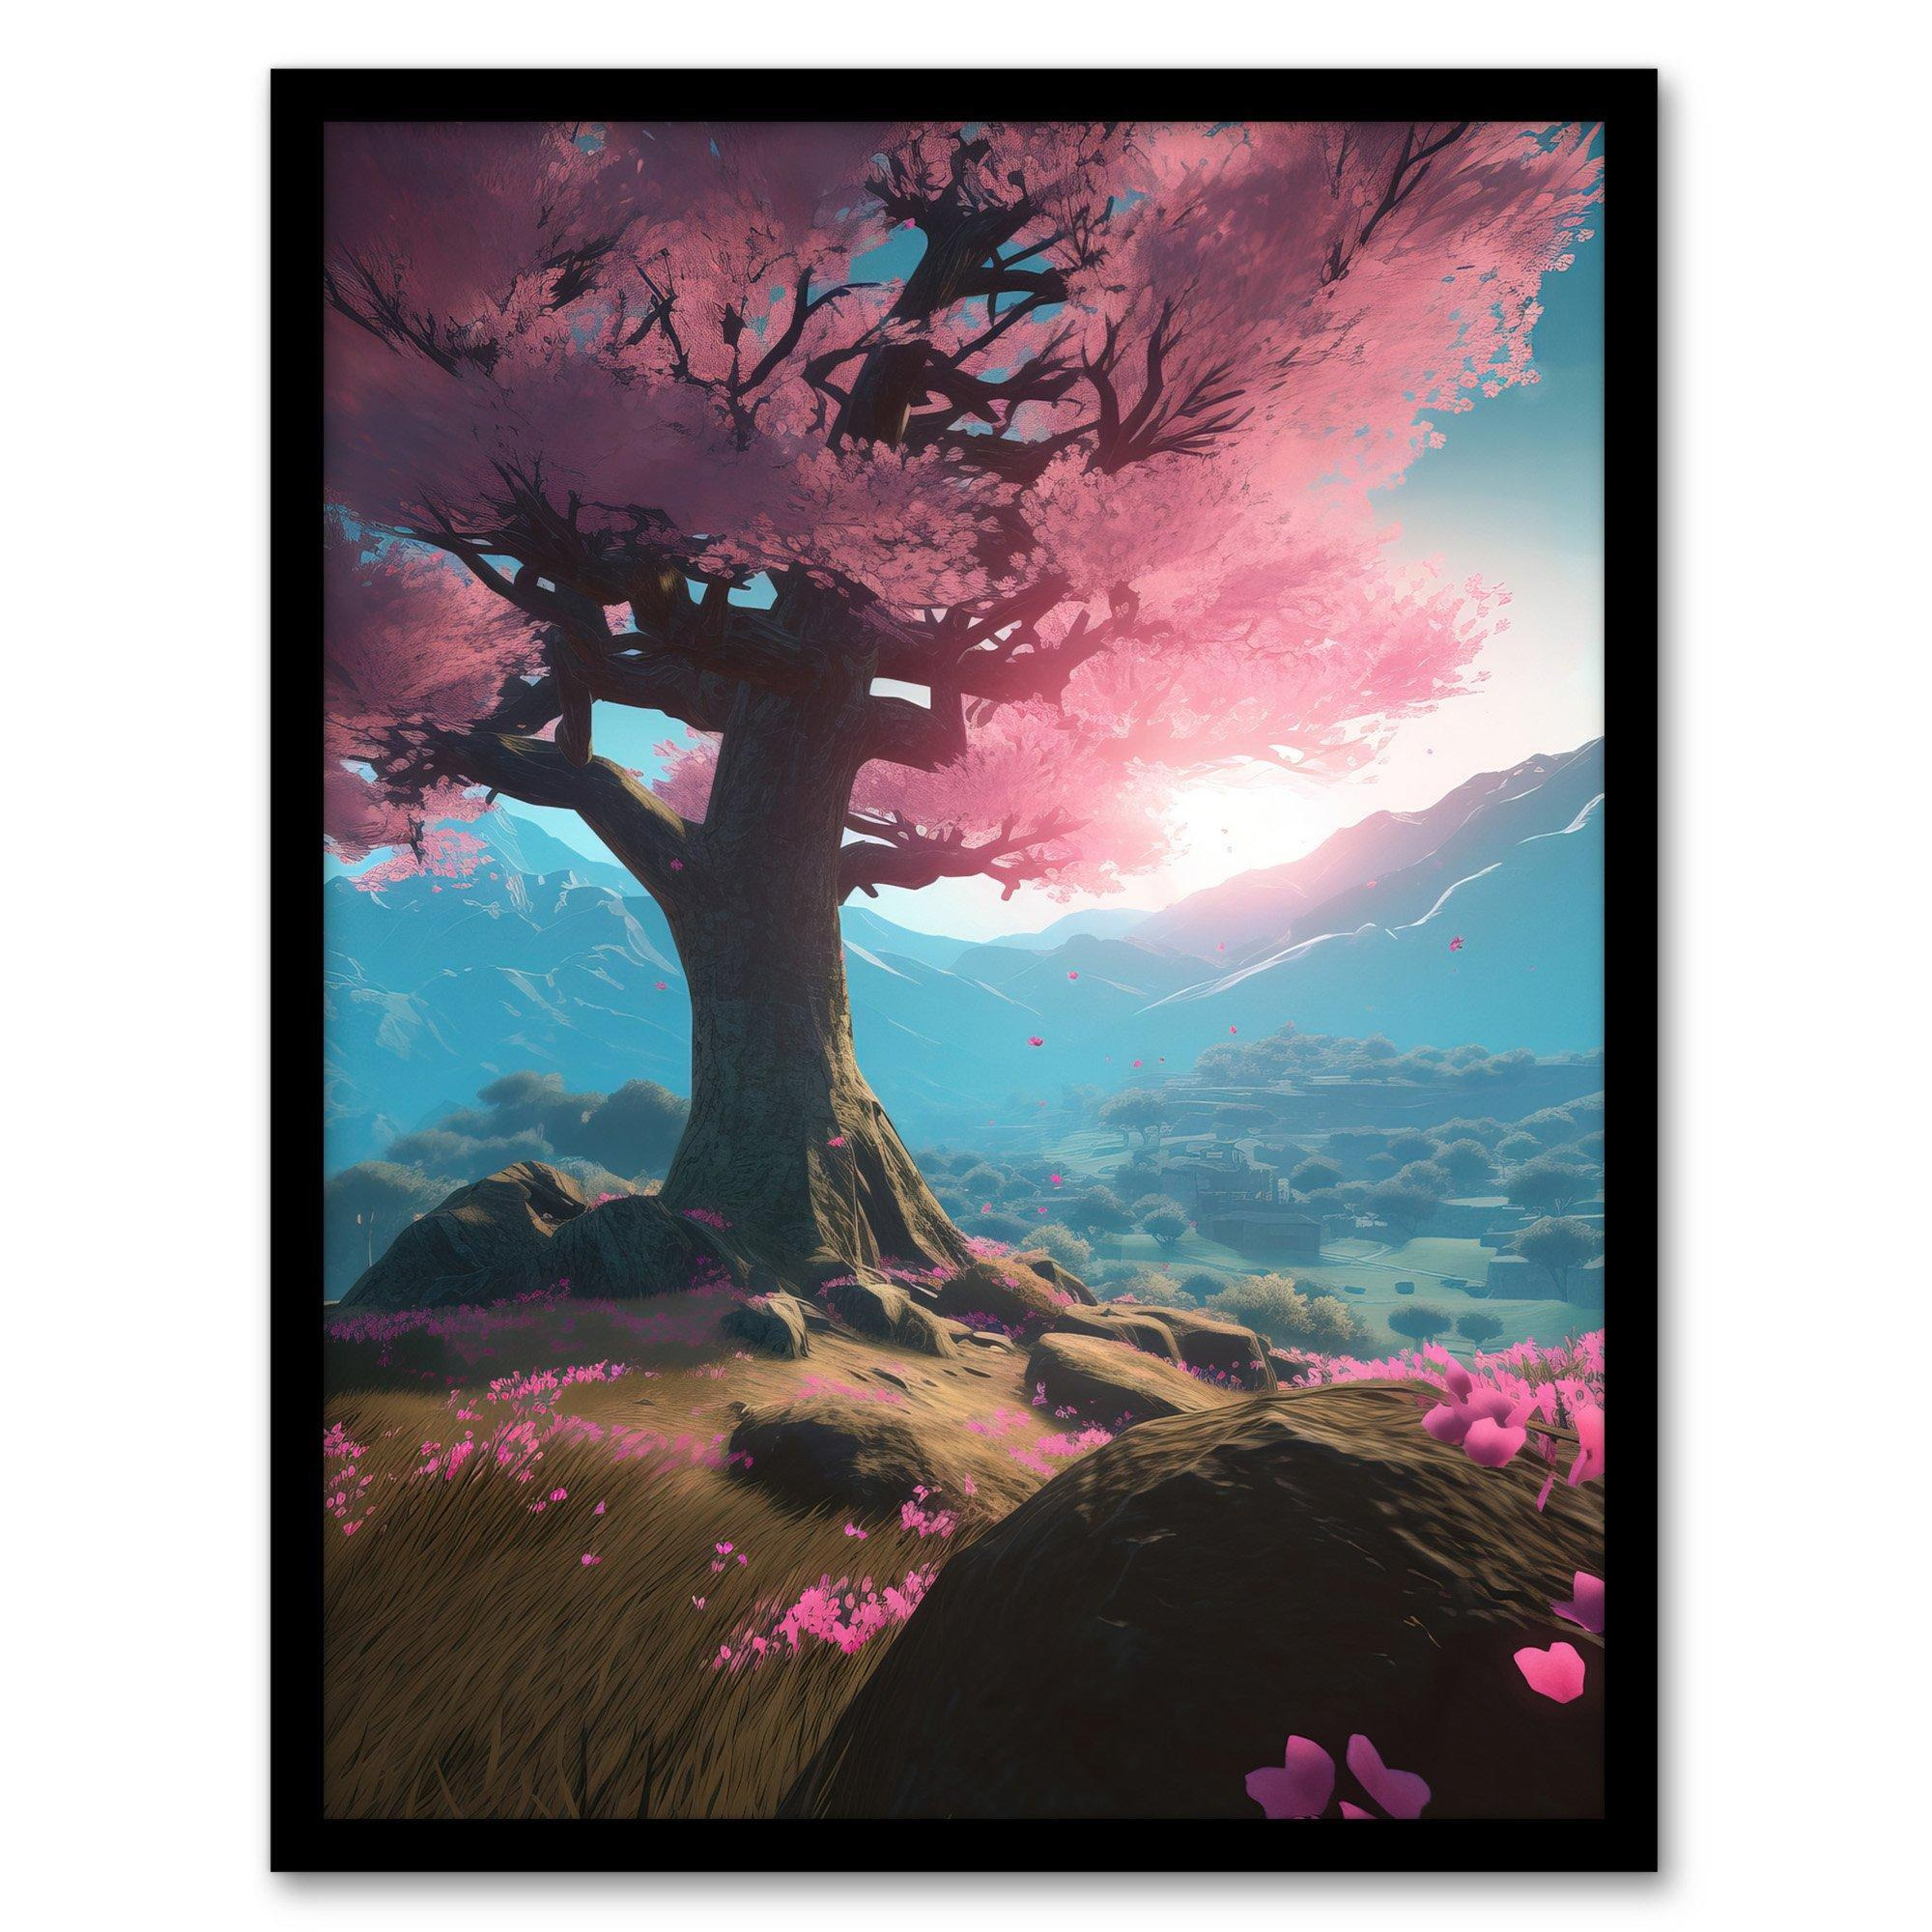 Lone Cherry Blossom Tree Blooming Painting Pink Blue Green Sunrise over Tranquil Forest Mountain Landscape Art Print Framed Poster Wall Decor - image 1